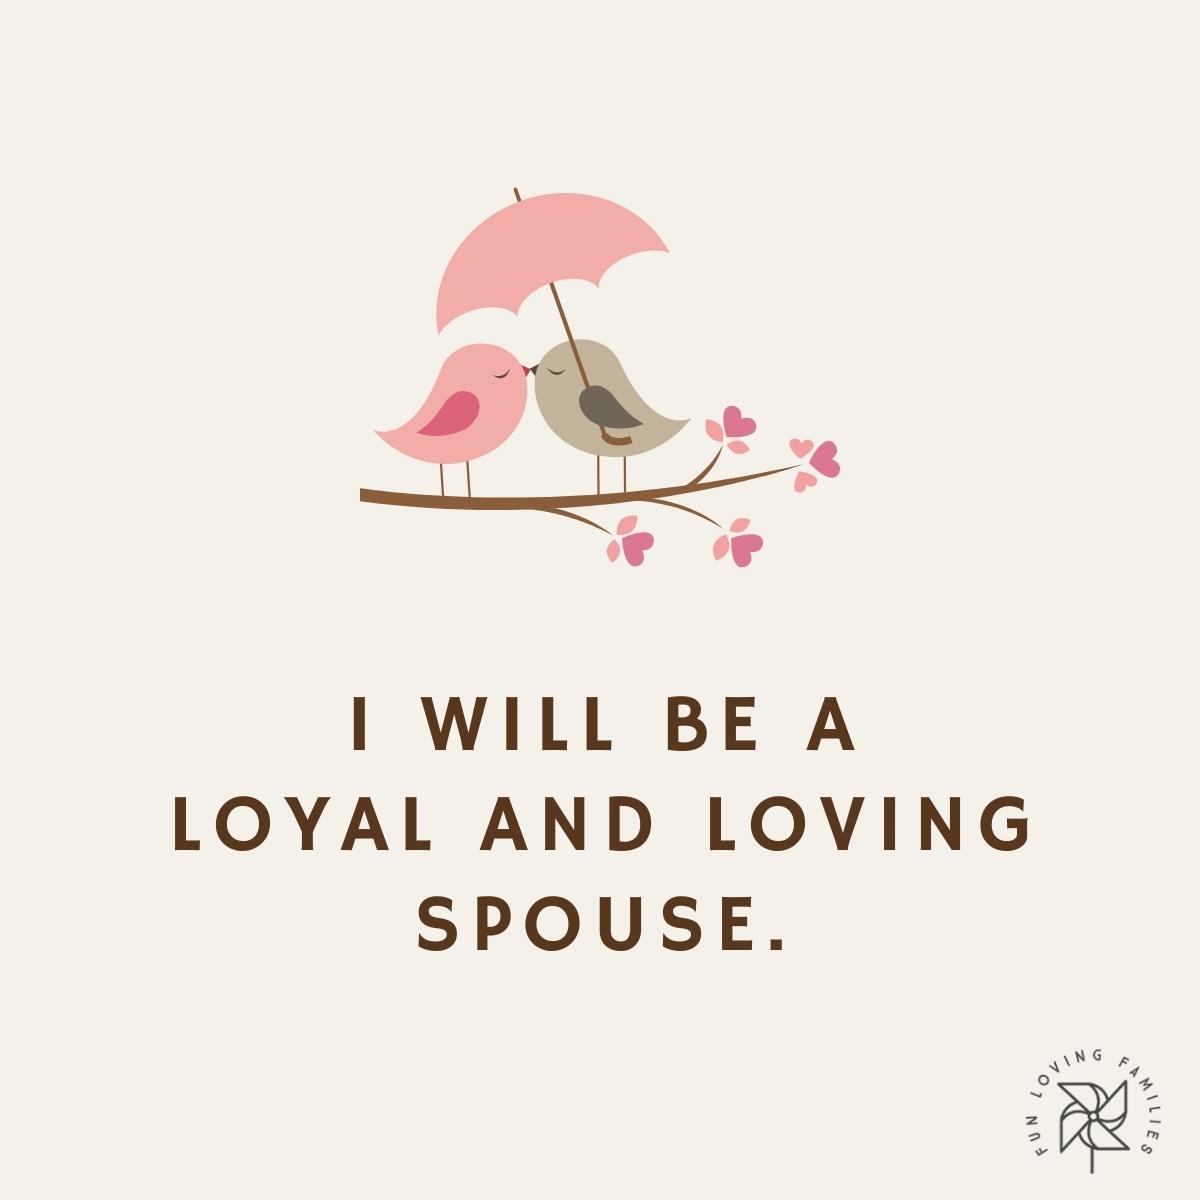 I will be a loyal and loving spouse affirmation